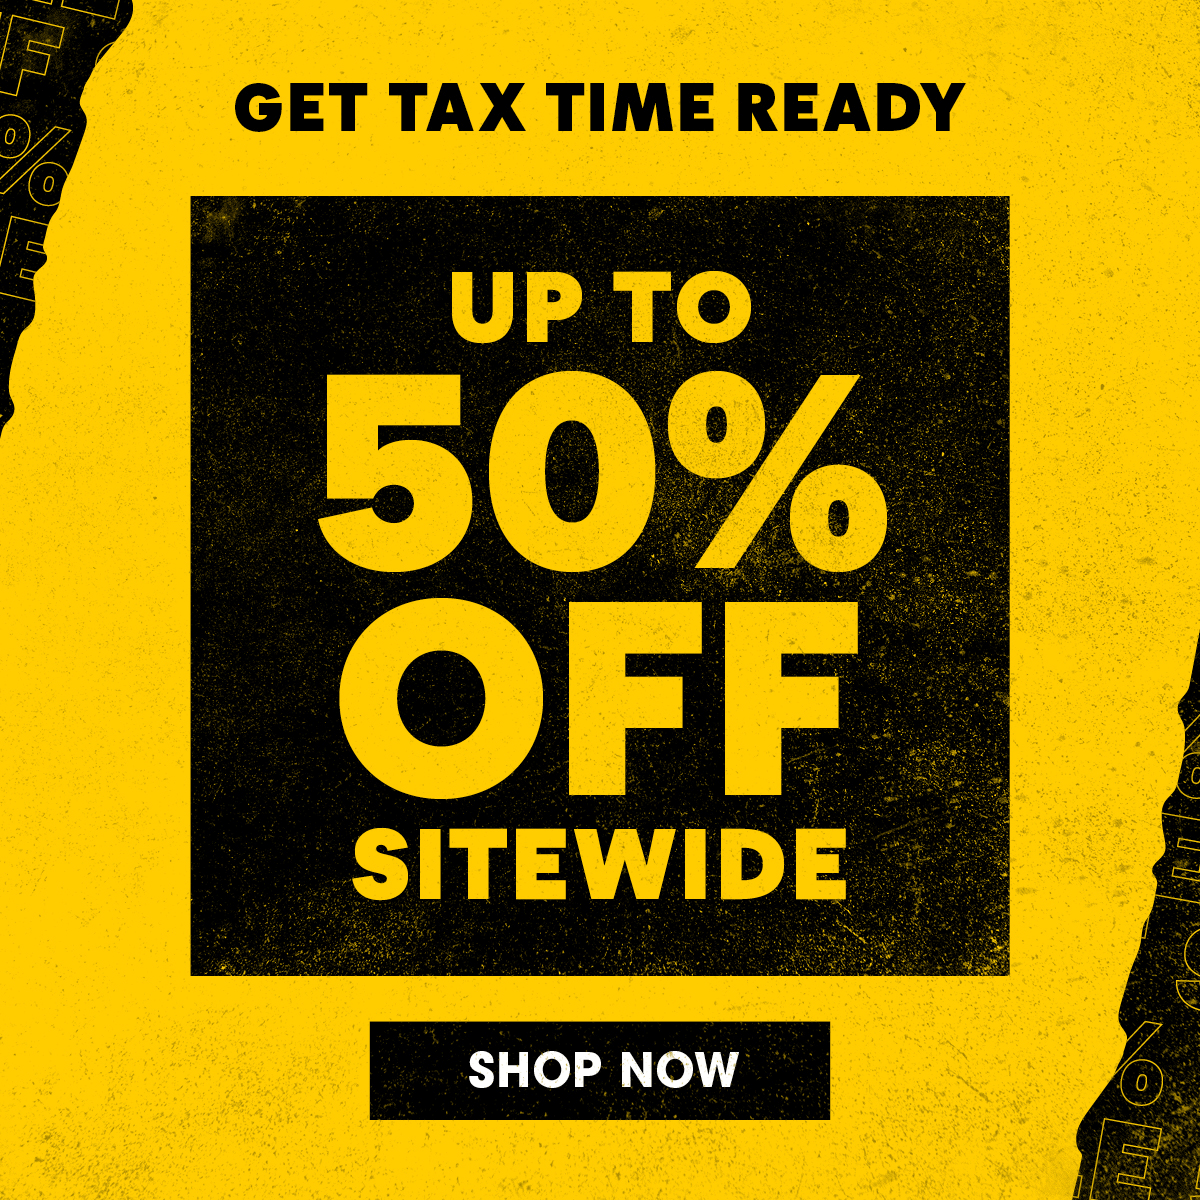 Up to 50% Off Sitewide. Limited Time Only